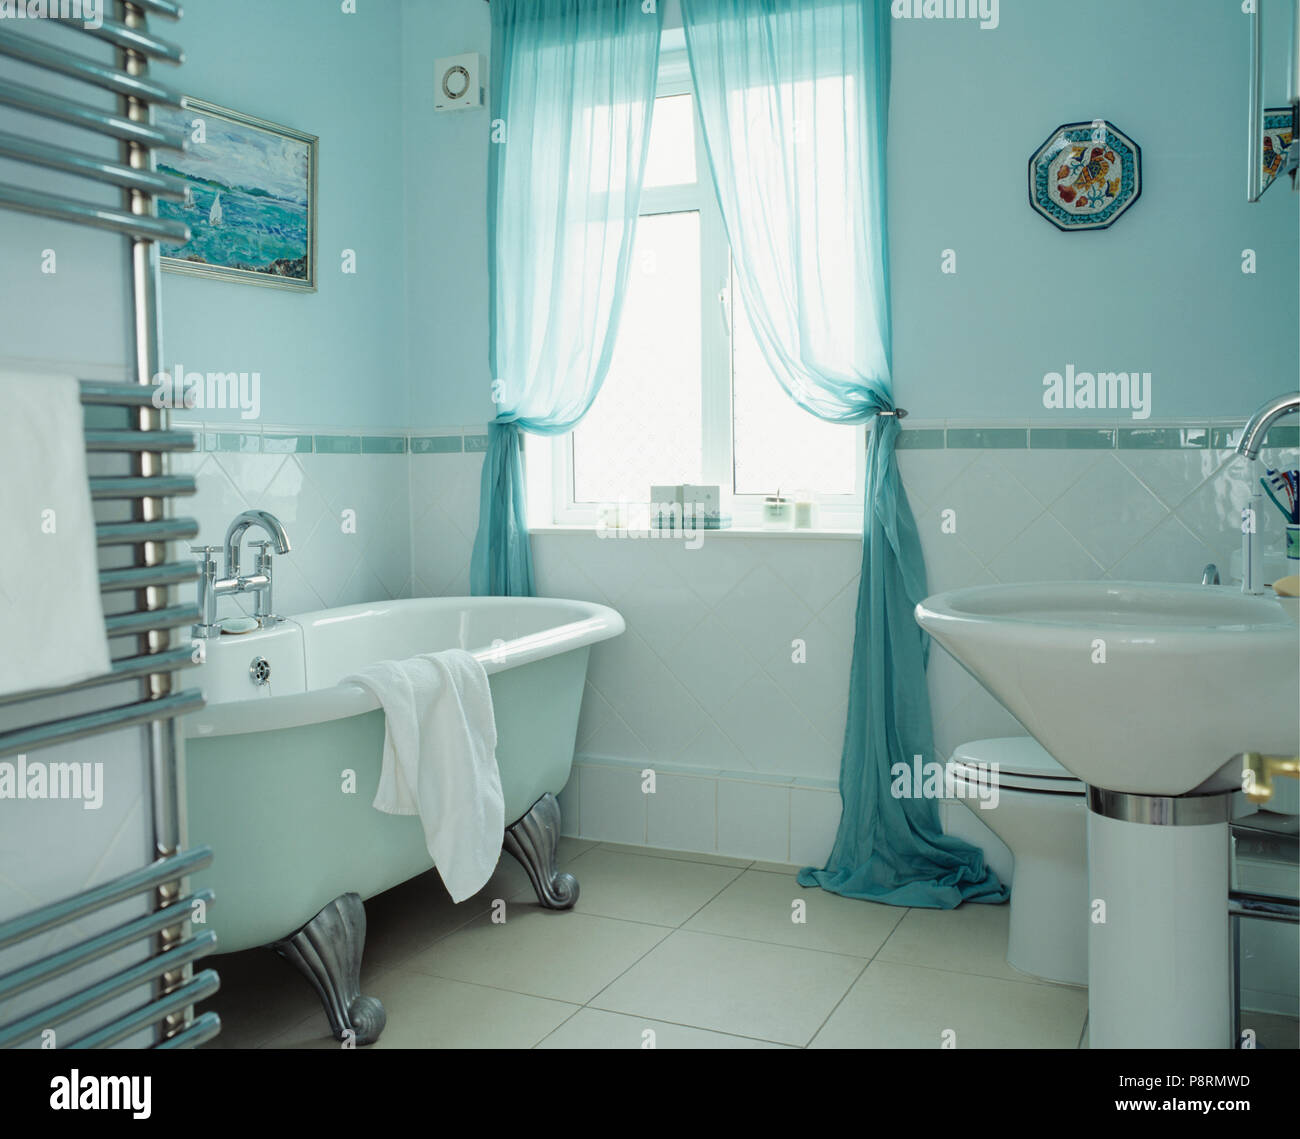 Traditional blue and white bathroom with roll top bath Stock Photo